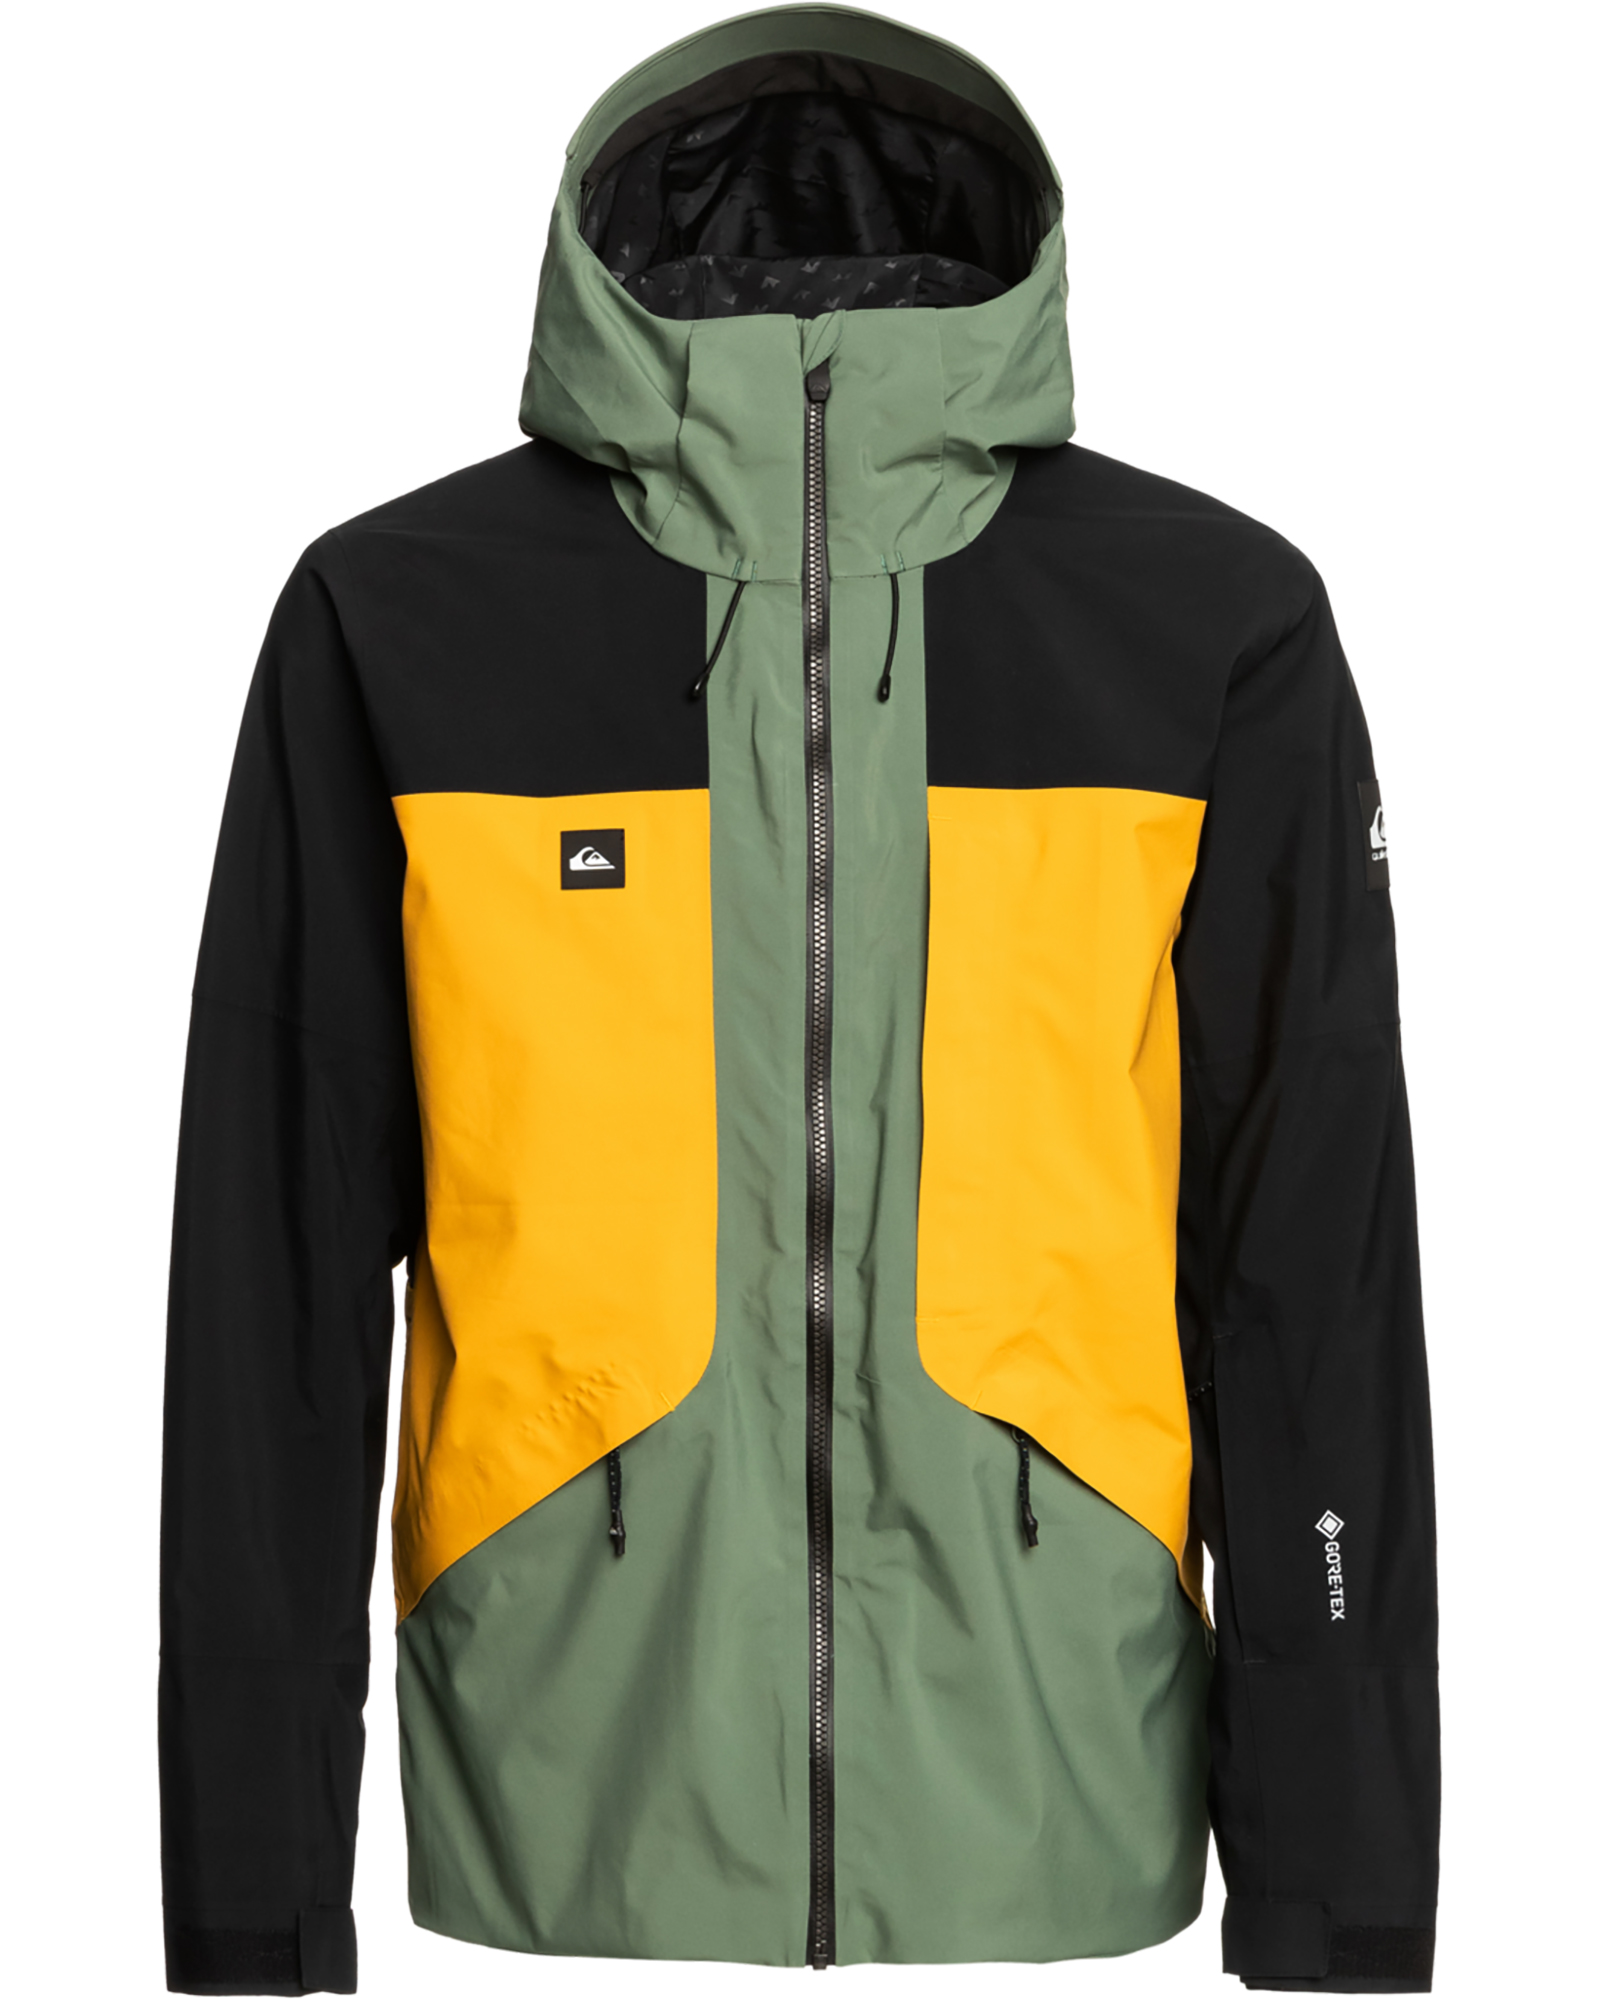 Quiksilver Forever Stretch GORE TEX Insulated Men’s Jacket - Laurel Wreath/Mineral Yellow/Black S